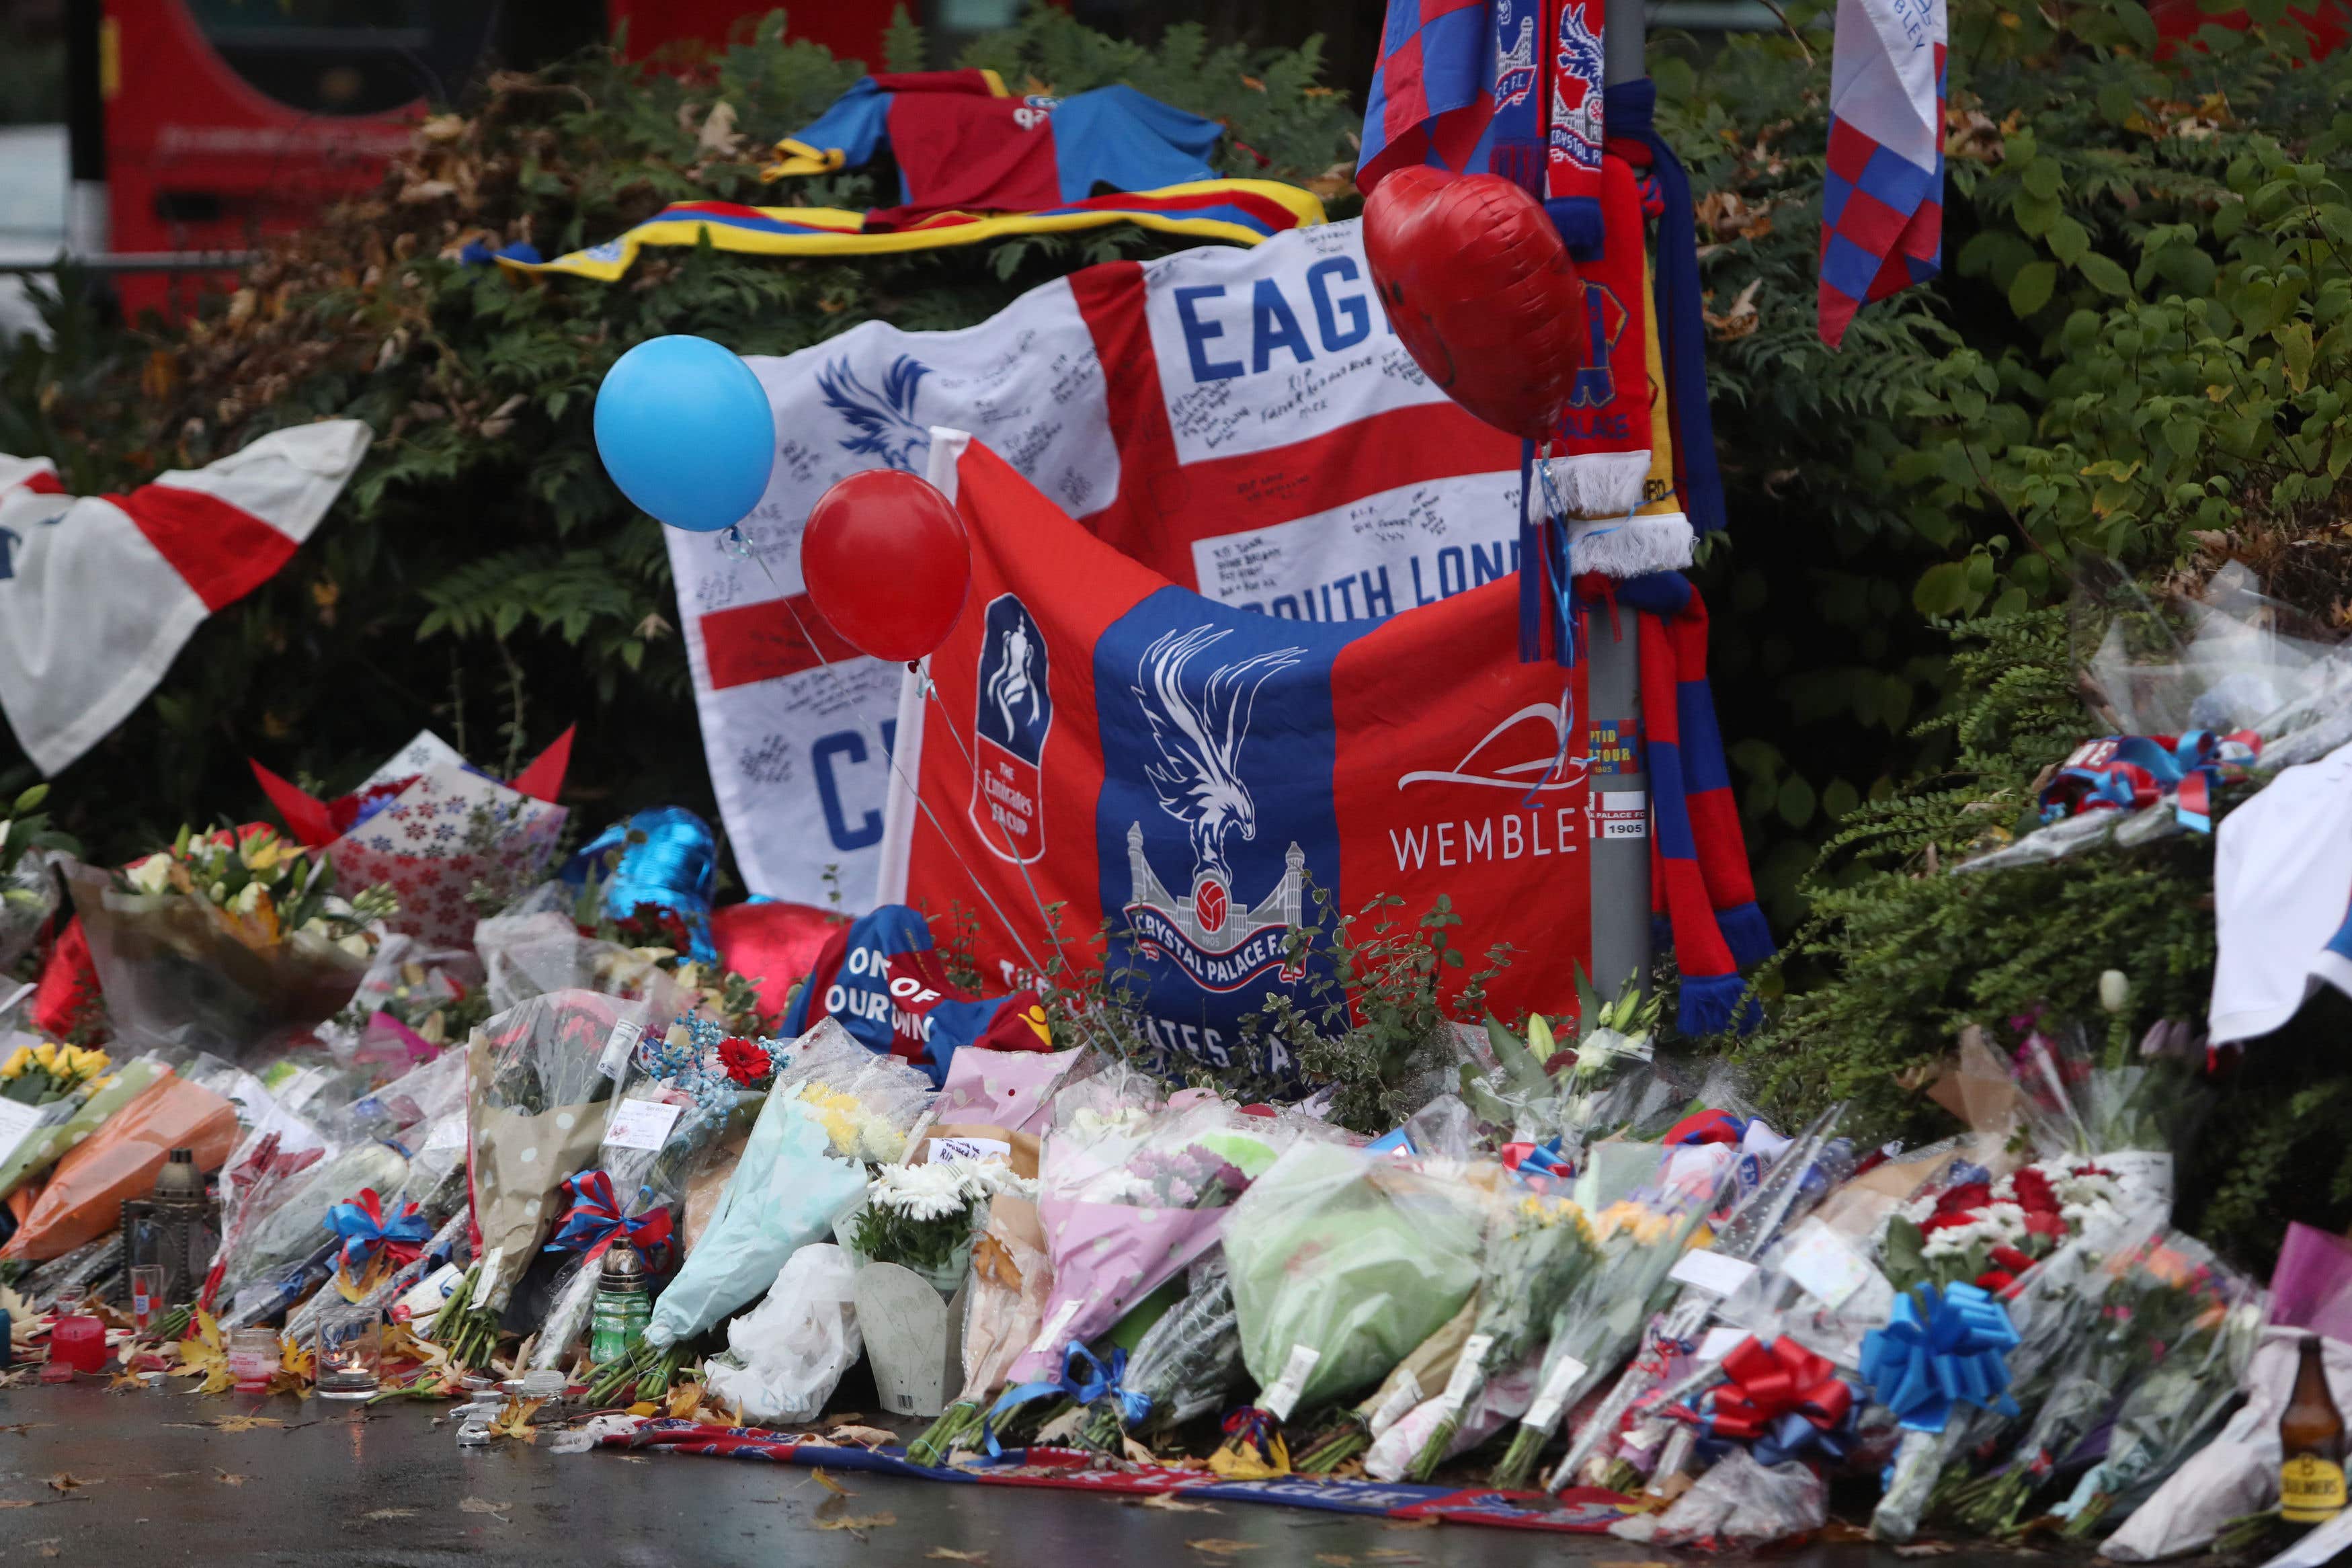 Floral tributes and Crystal Palace football colours left near the scene where a tram crashed, killing seven people, in Croydon, south London (PA)